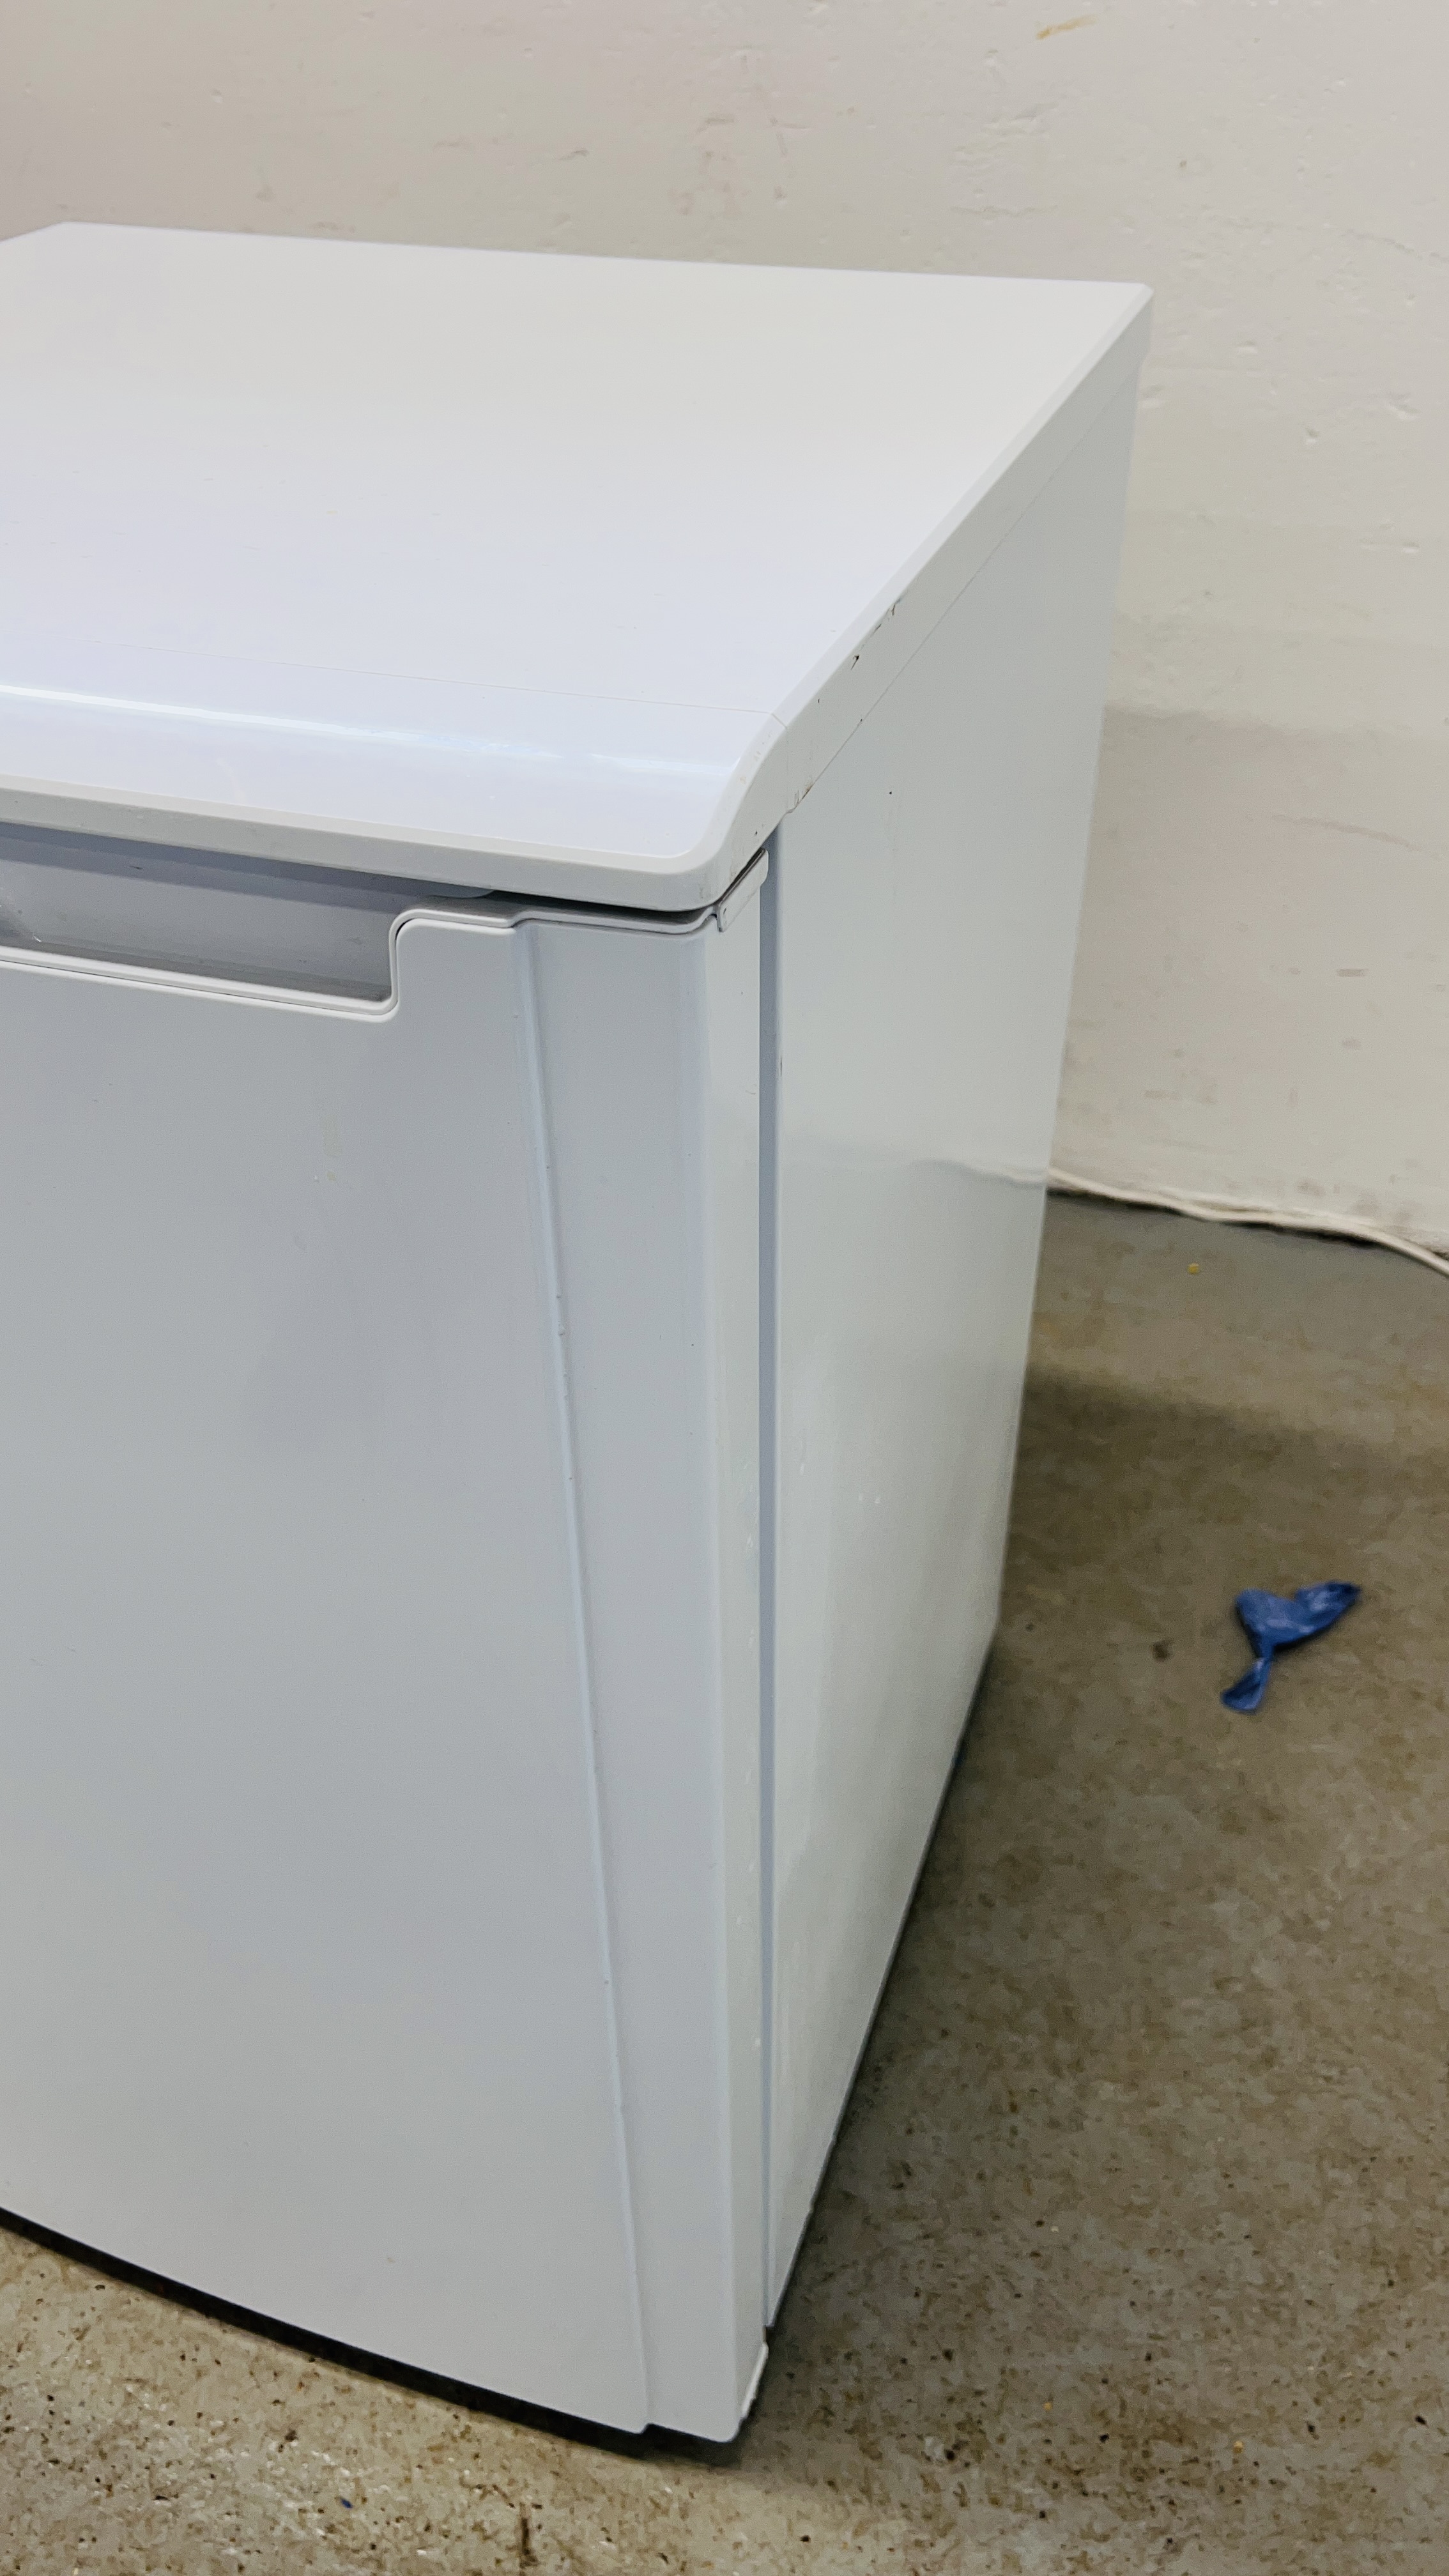 A HOTPOINT UNDER COUNTER FREEZER - SOLD AS SEEN. - Image 8 of 8